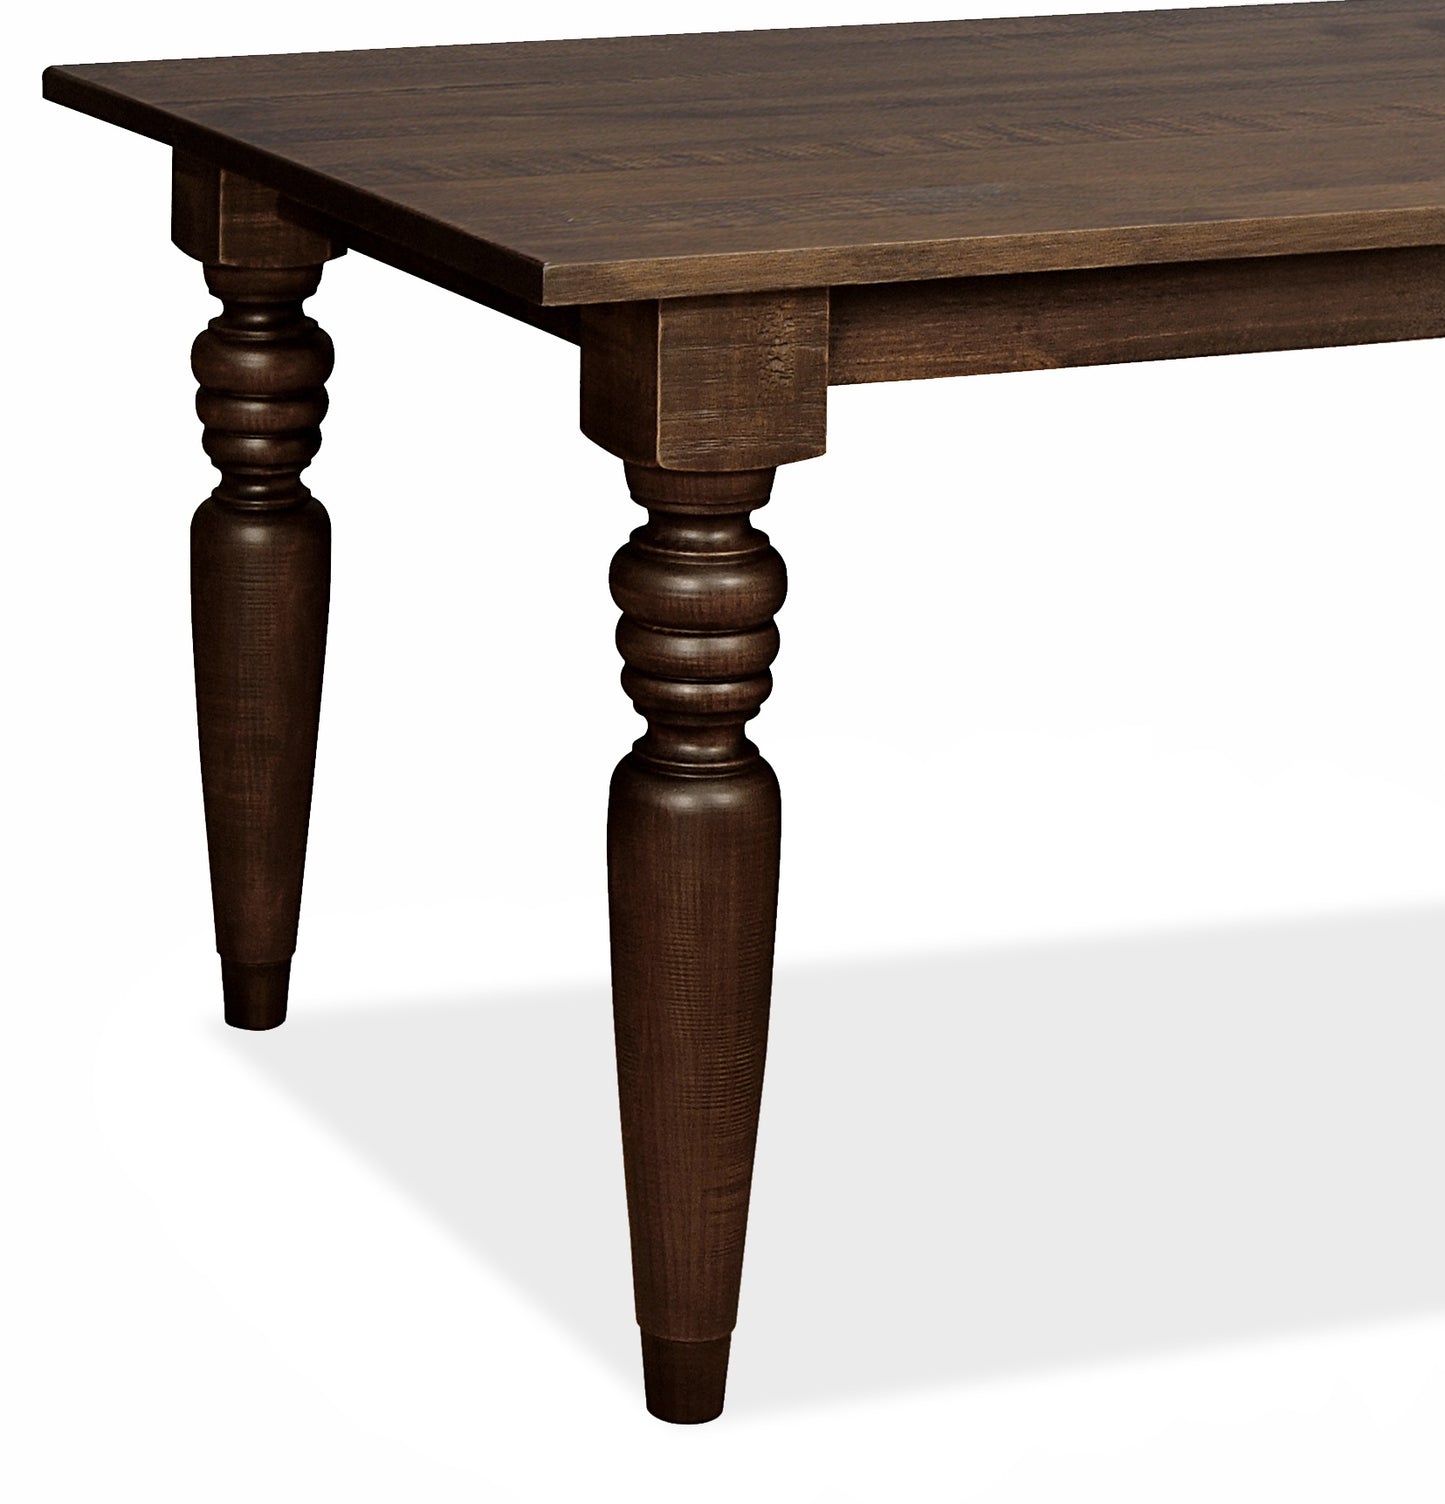 Flora Solid Wood Dining Table with 4” Turned Legs